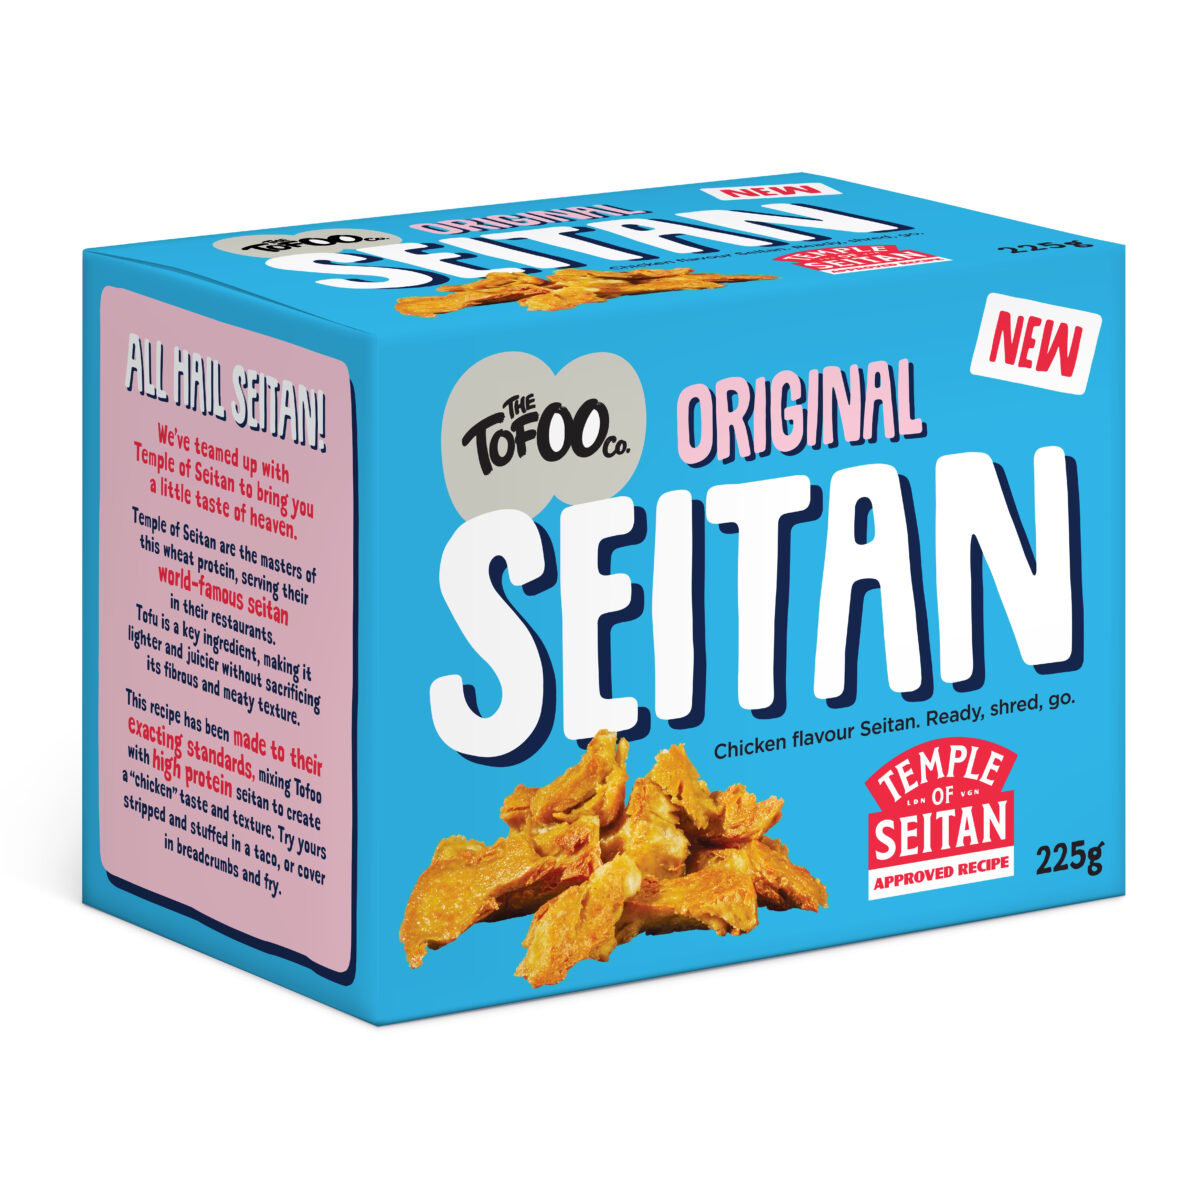 A chicken flavored seitan product from Tofoo